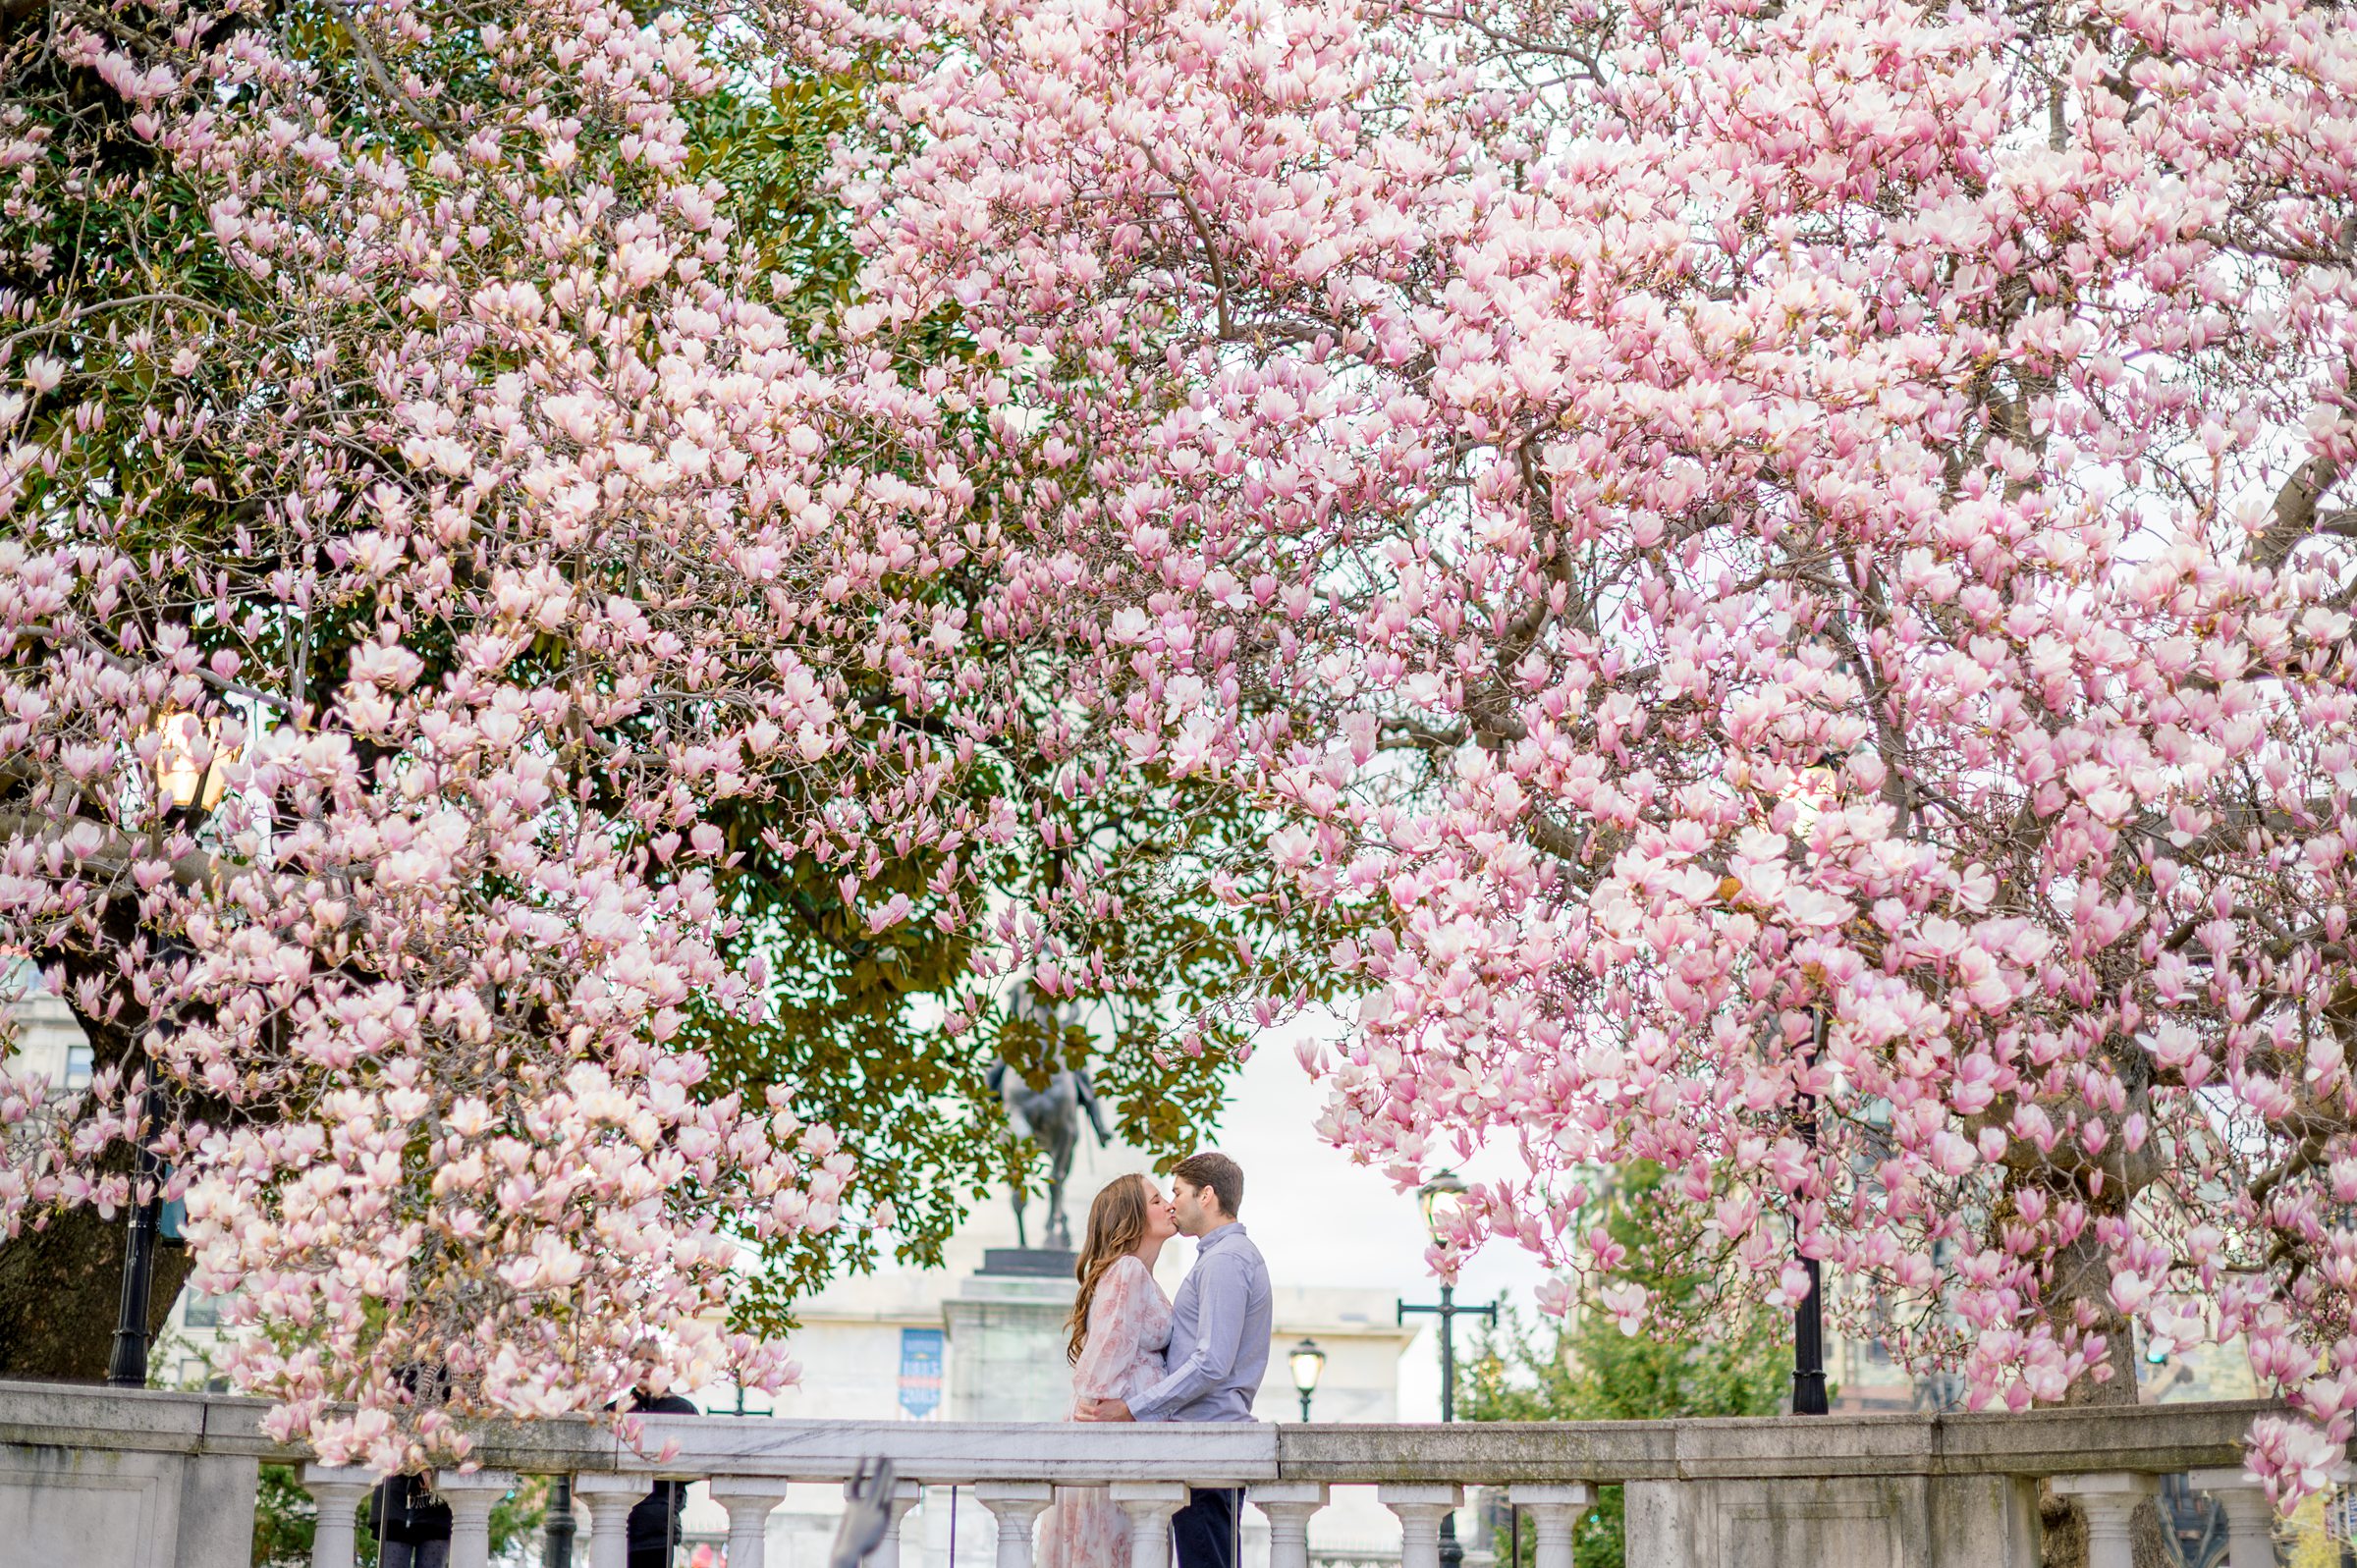 Meg and Sean's maternity photos in Baltimore featuring stunning pink magnolia trees by Baltimore Photographer Cait Kramer Photography